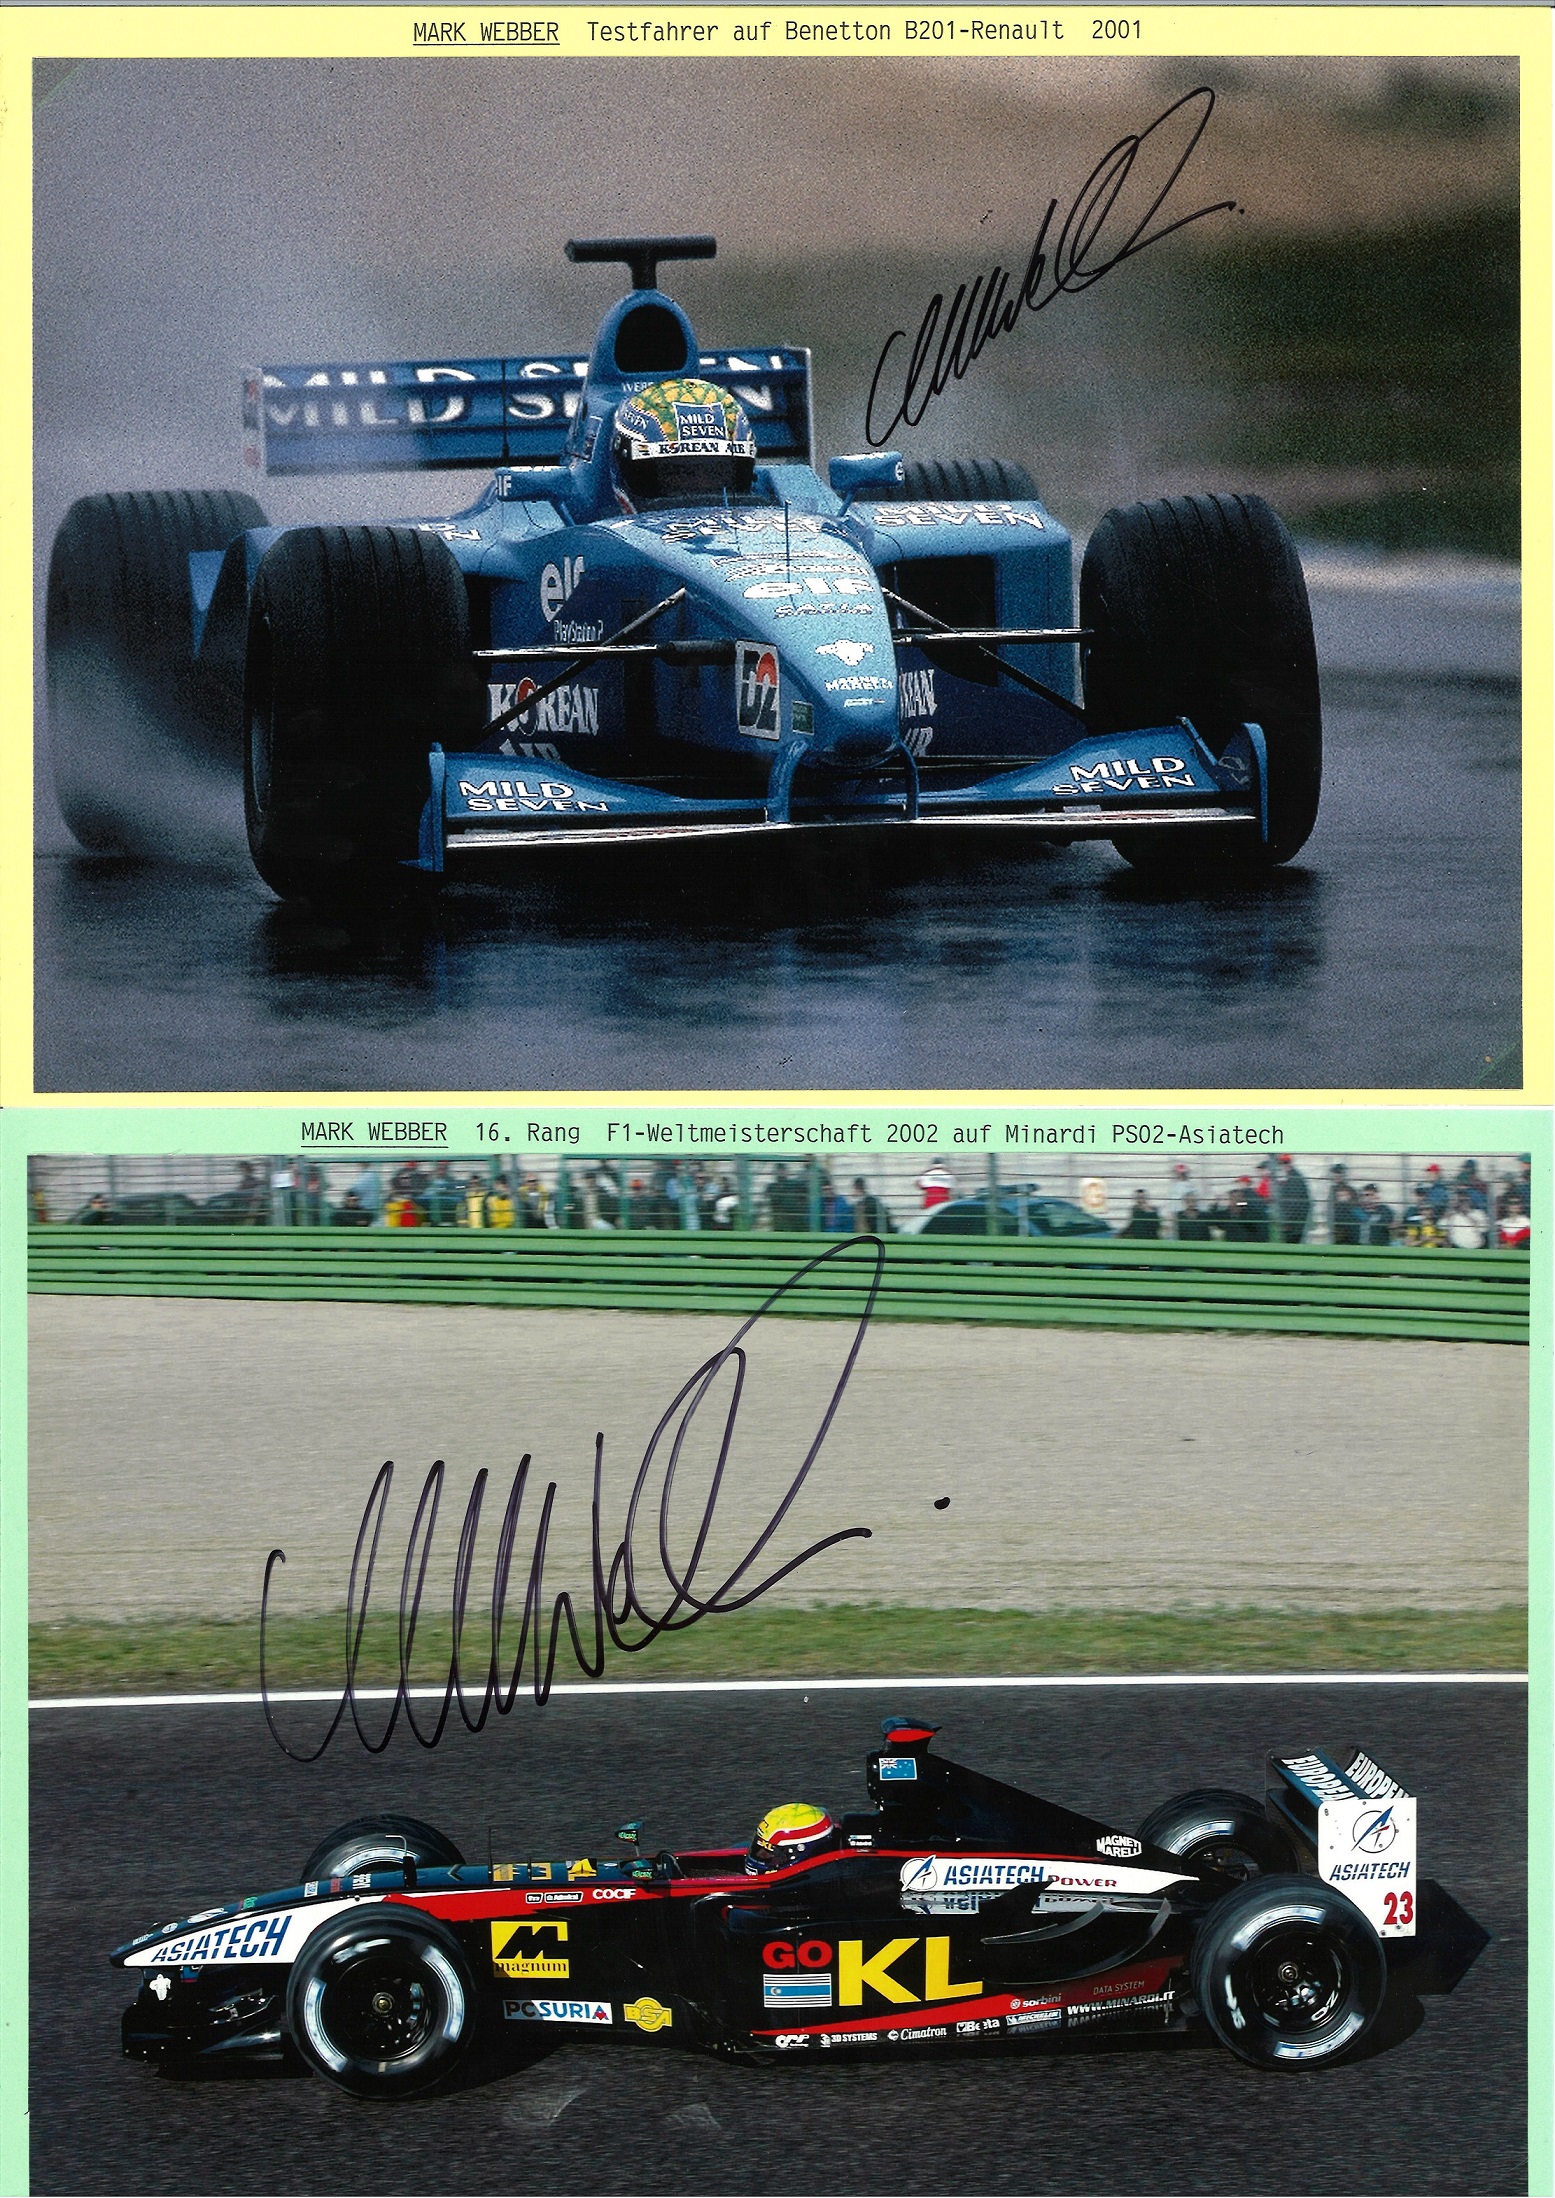 Mark Webber Motor Racing signed photo collection - Image 5 of 5